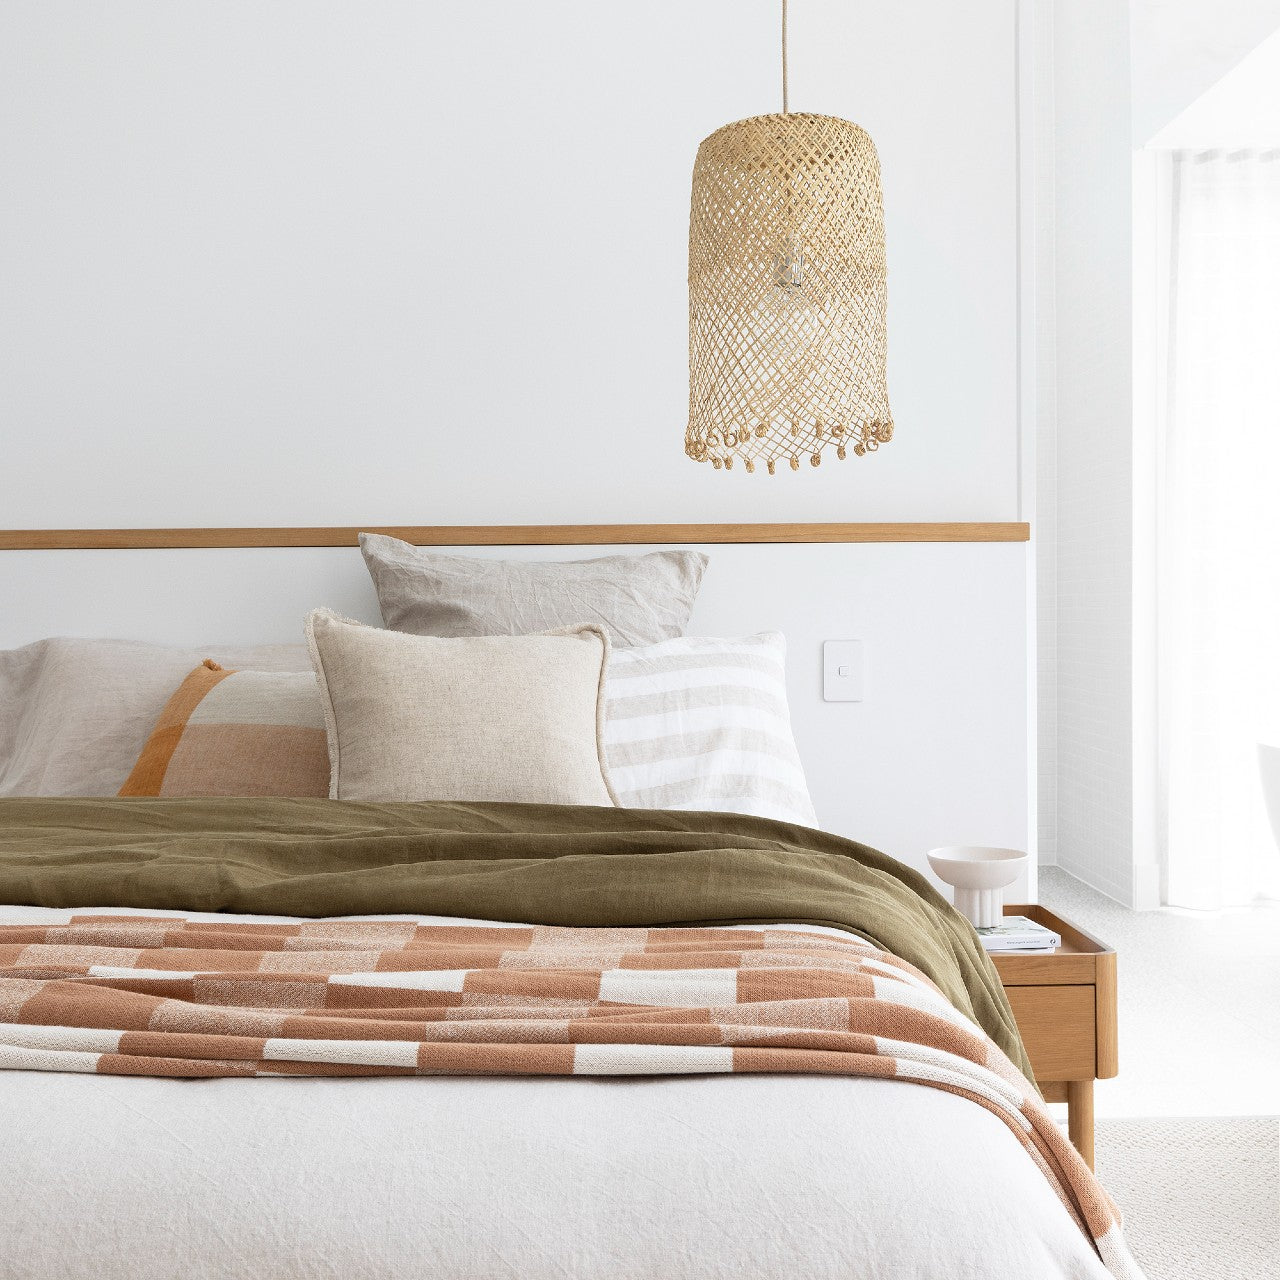 Rattan pendant light with ring details at the bottom. shown as a bedisde pendant hanging above a beuaitfully made bed with olive green and rust coloured bed linen.